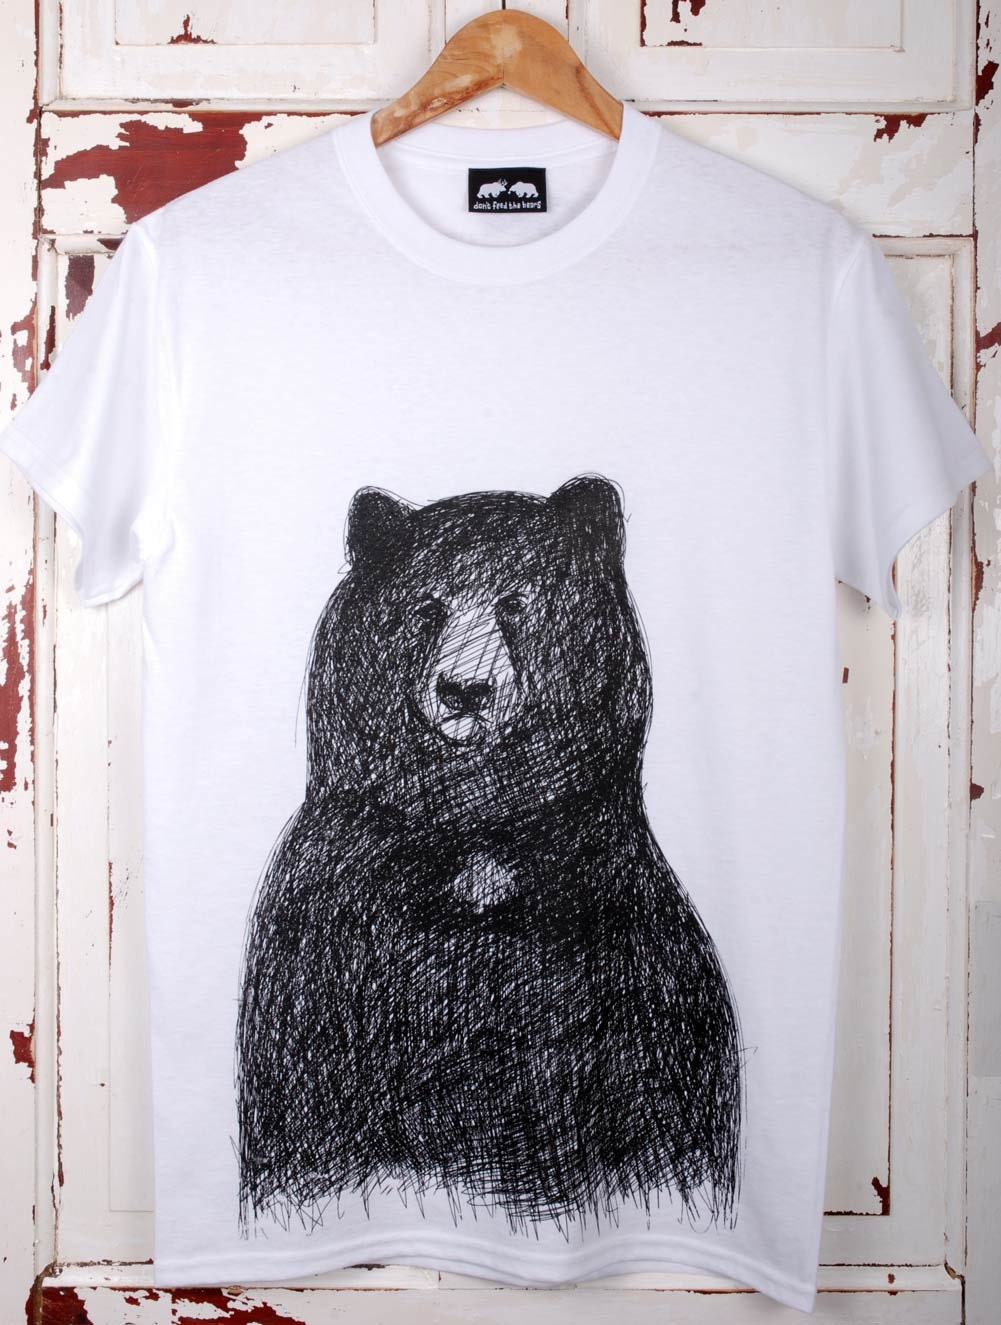 Big Bear T-Shirt Hand printed in Sheffield UK by Dontfeedthebears